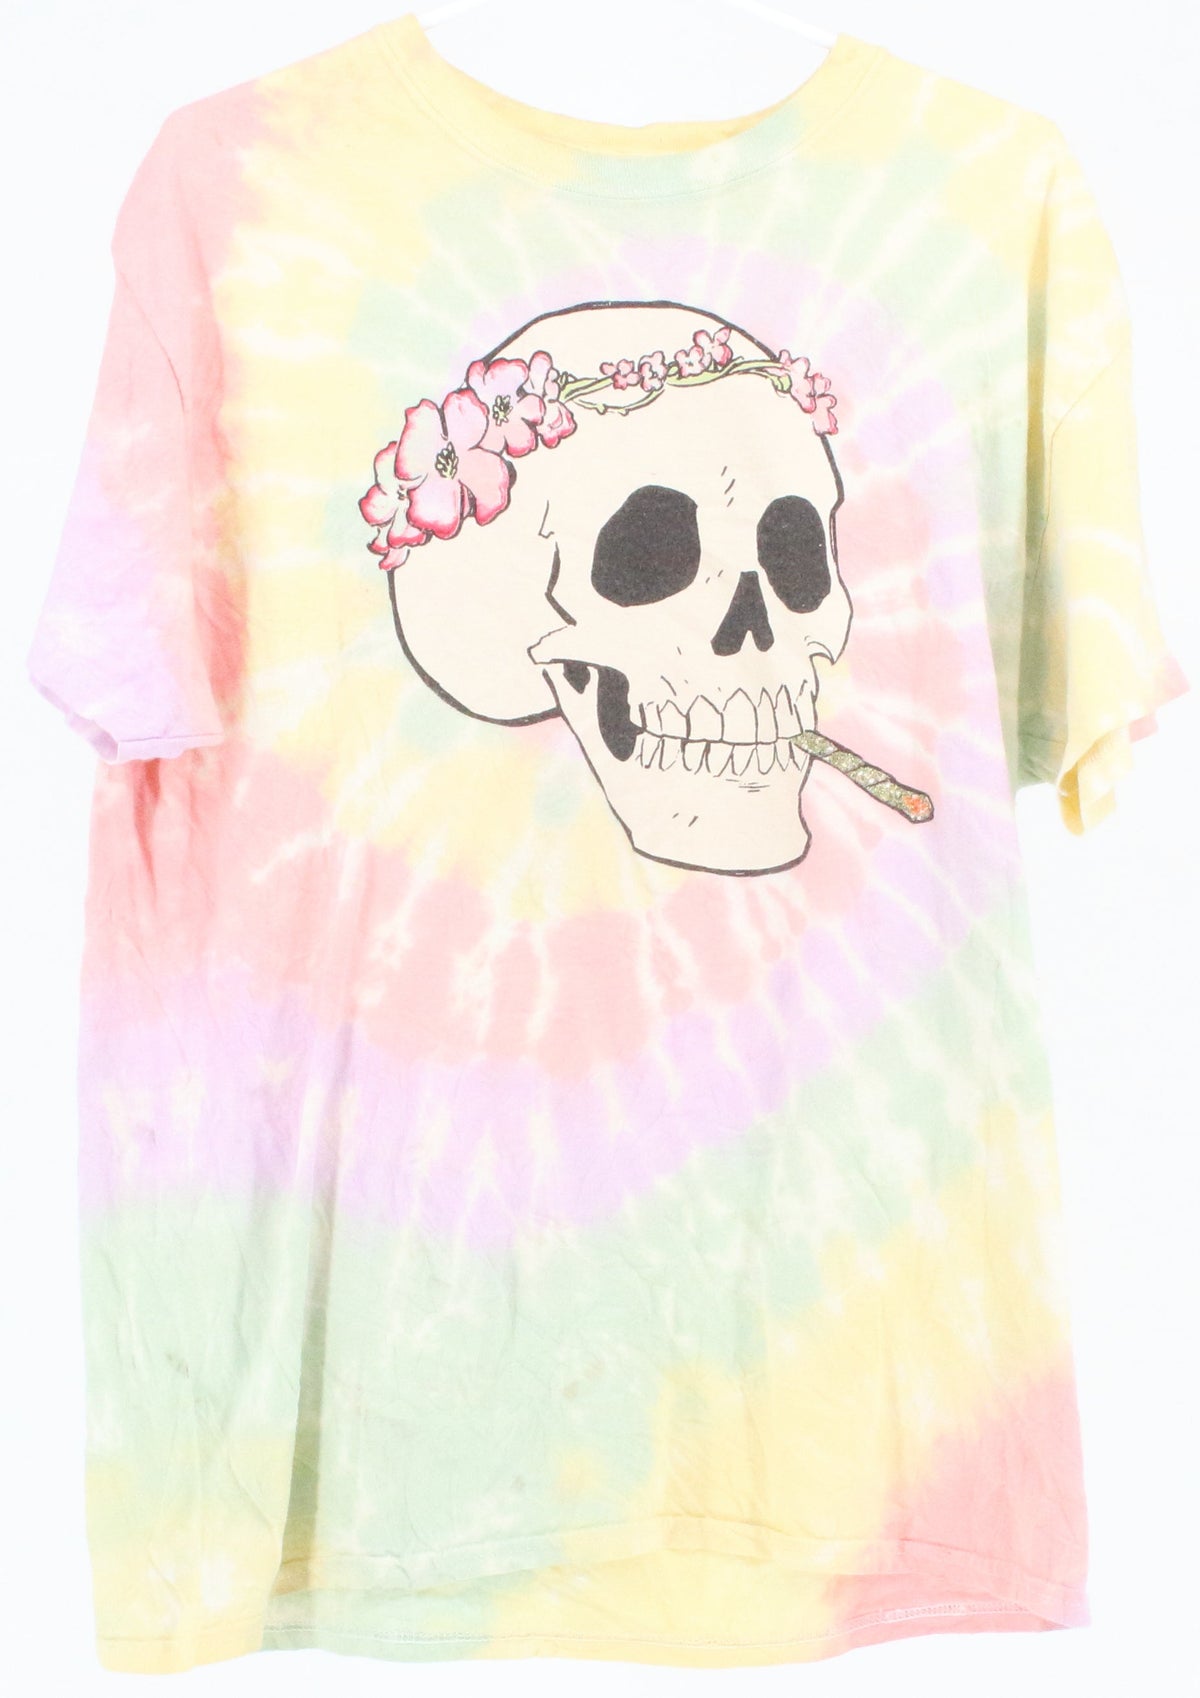 Jenny Lewis Multi Color Tie Dye Print Skull Front Graphic and Back "Heads Gonna Roll" Graphic T-Shirt